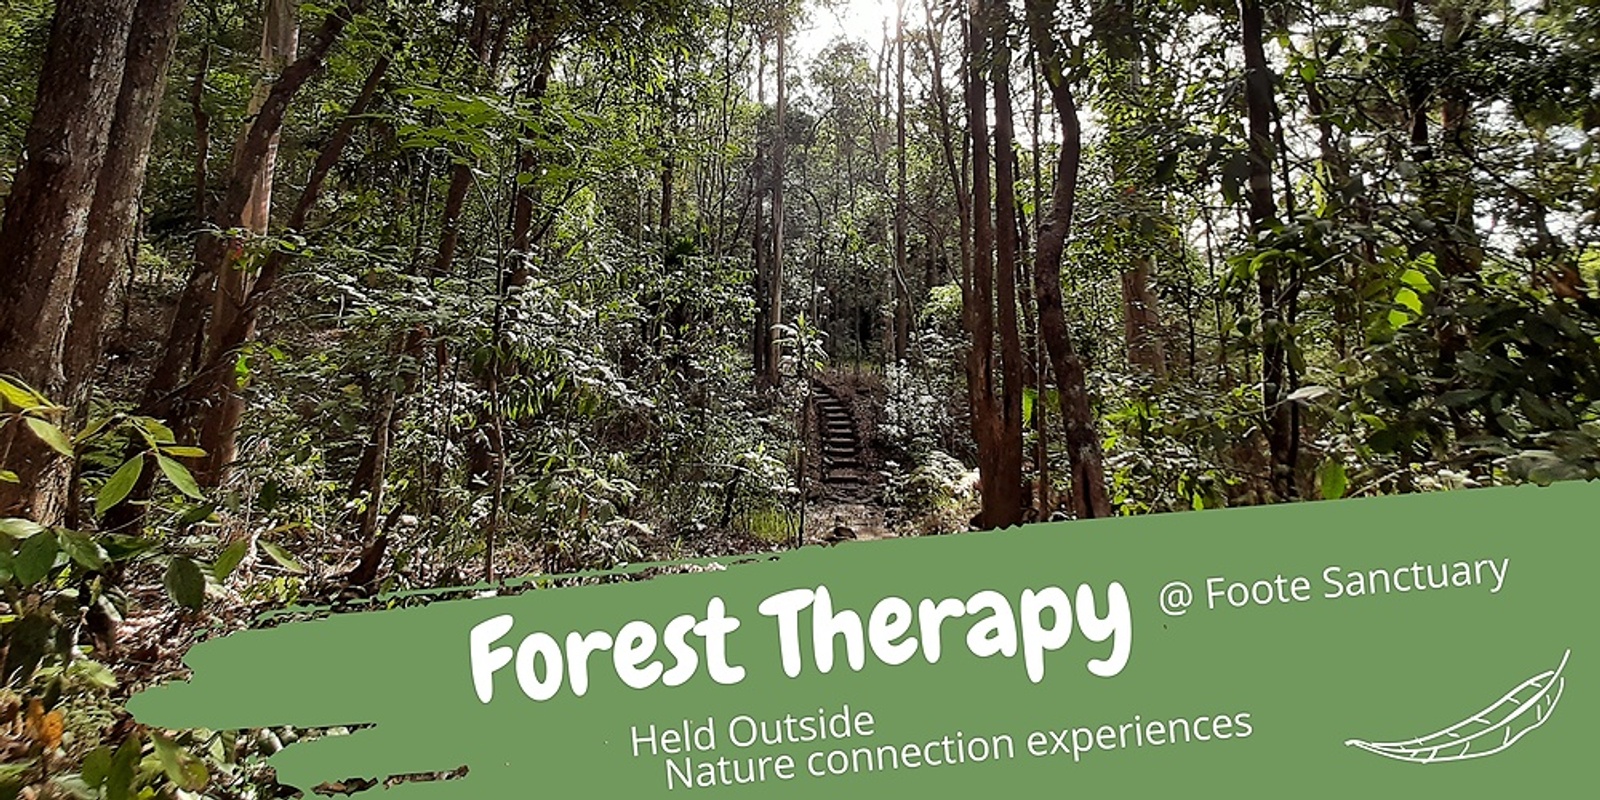 Forest Therapy at Foote Sanctuary 22 Apr 23